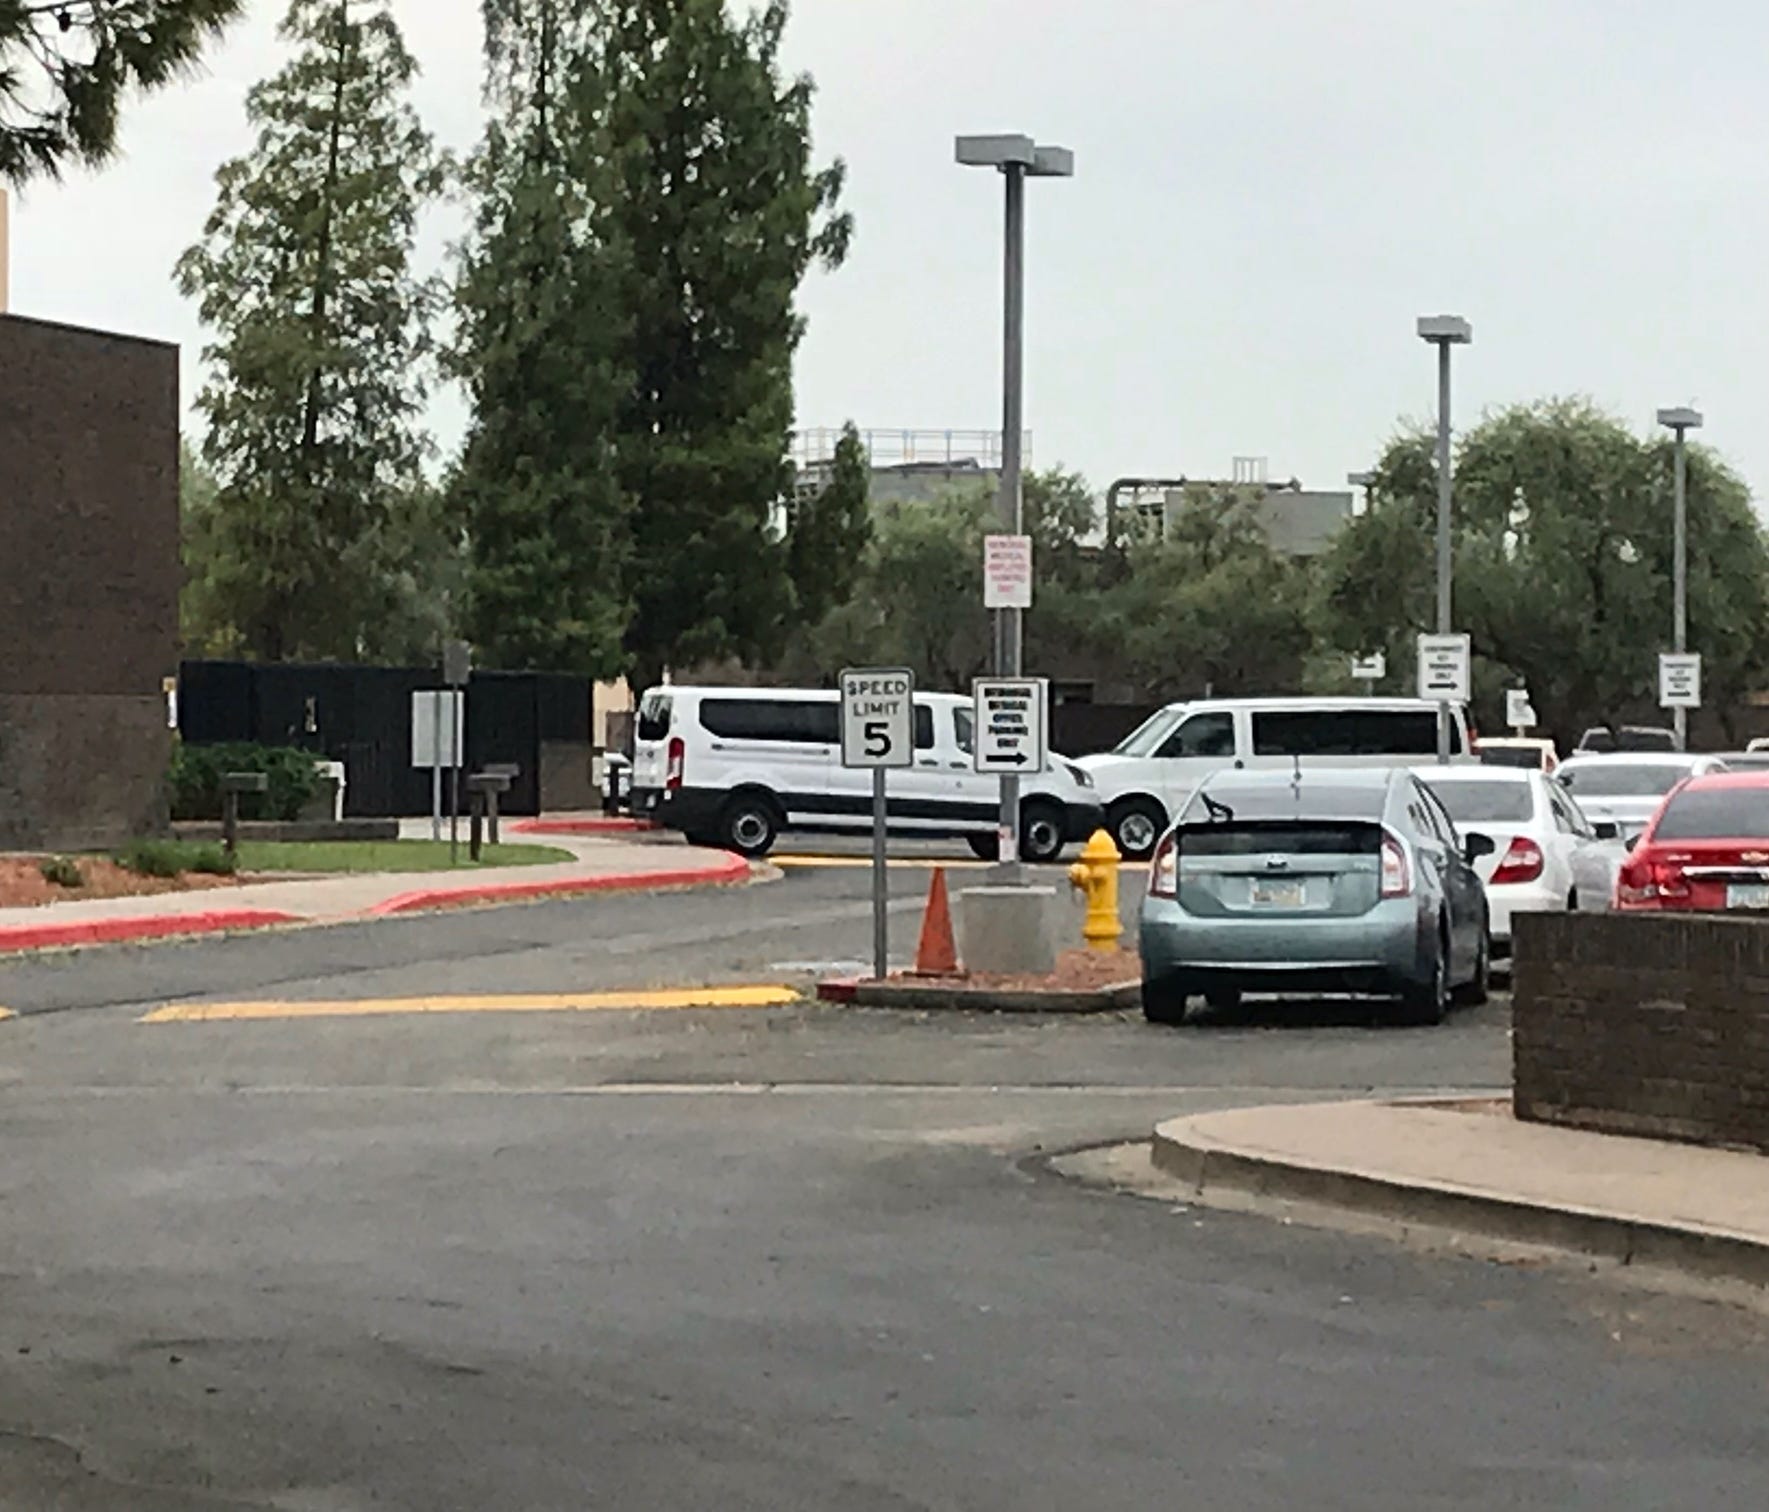 White vans are seen waiting outside a shelter in Phoenix that has been housing migrant children separated from their parents on July 10, 2018.